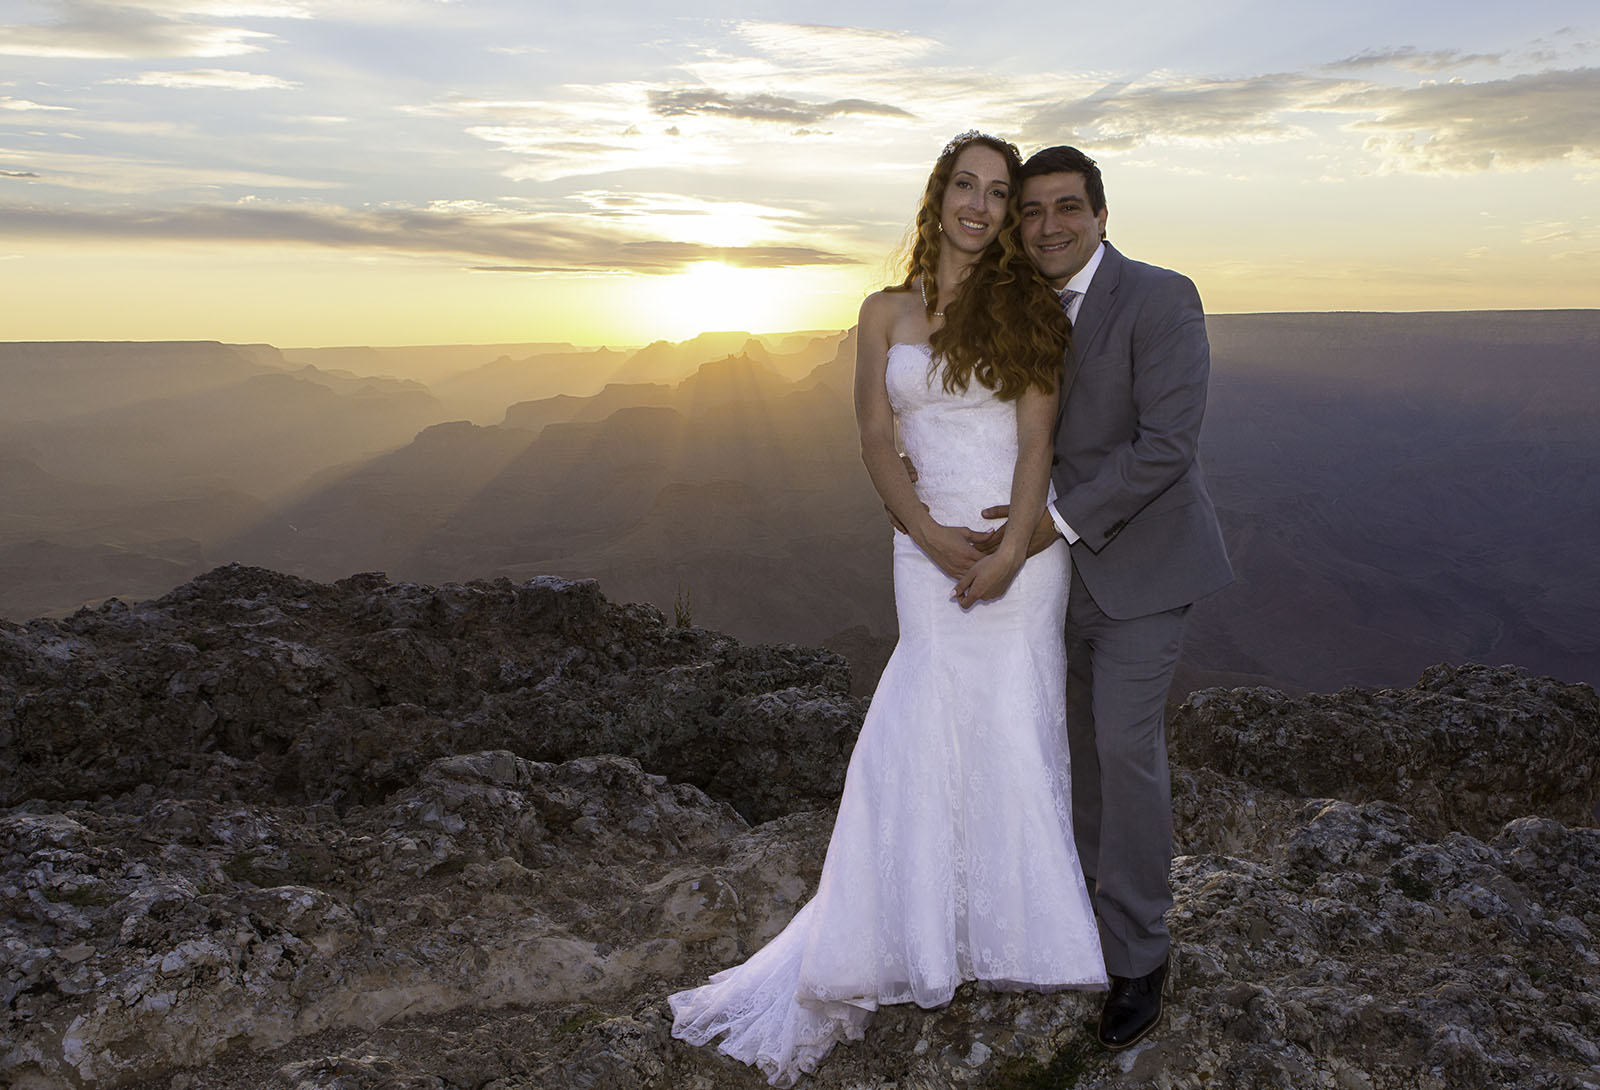 Sunset photo of a beautiful bride and groom getting married at the Grand Canyon.